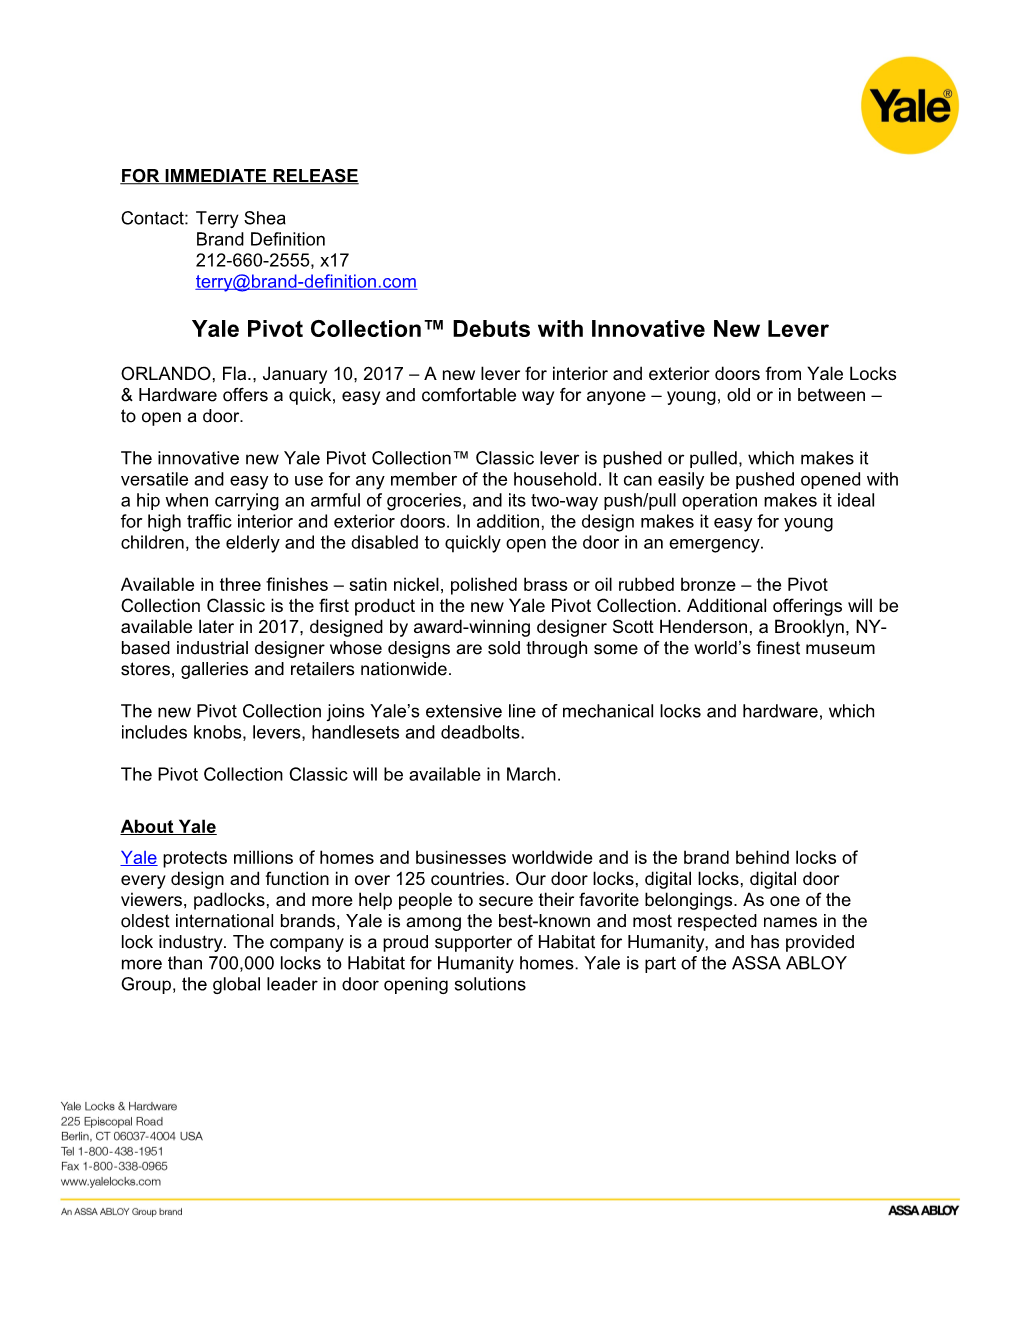 Yale Pivot Collection Debuts with Innovative New Lever